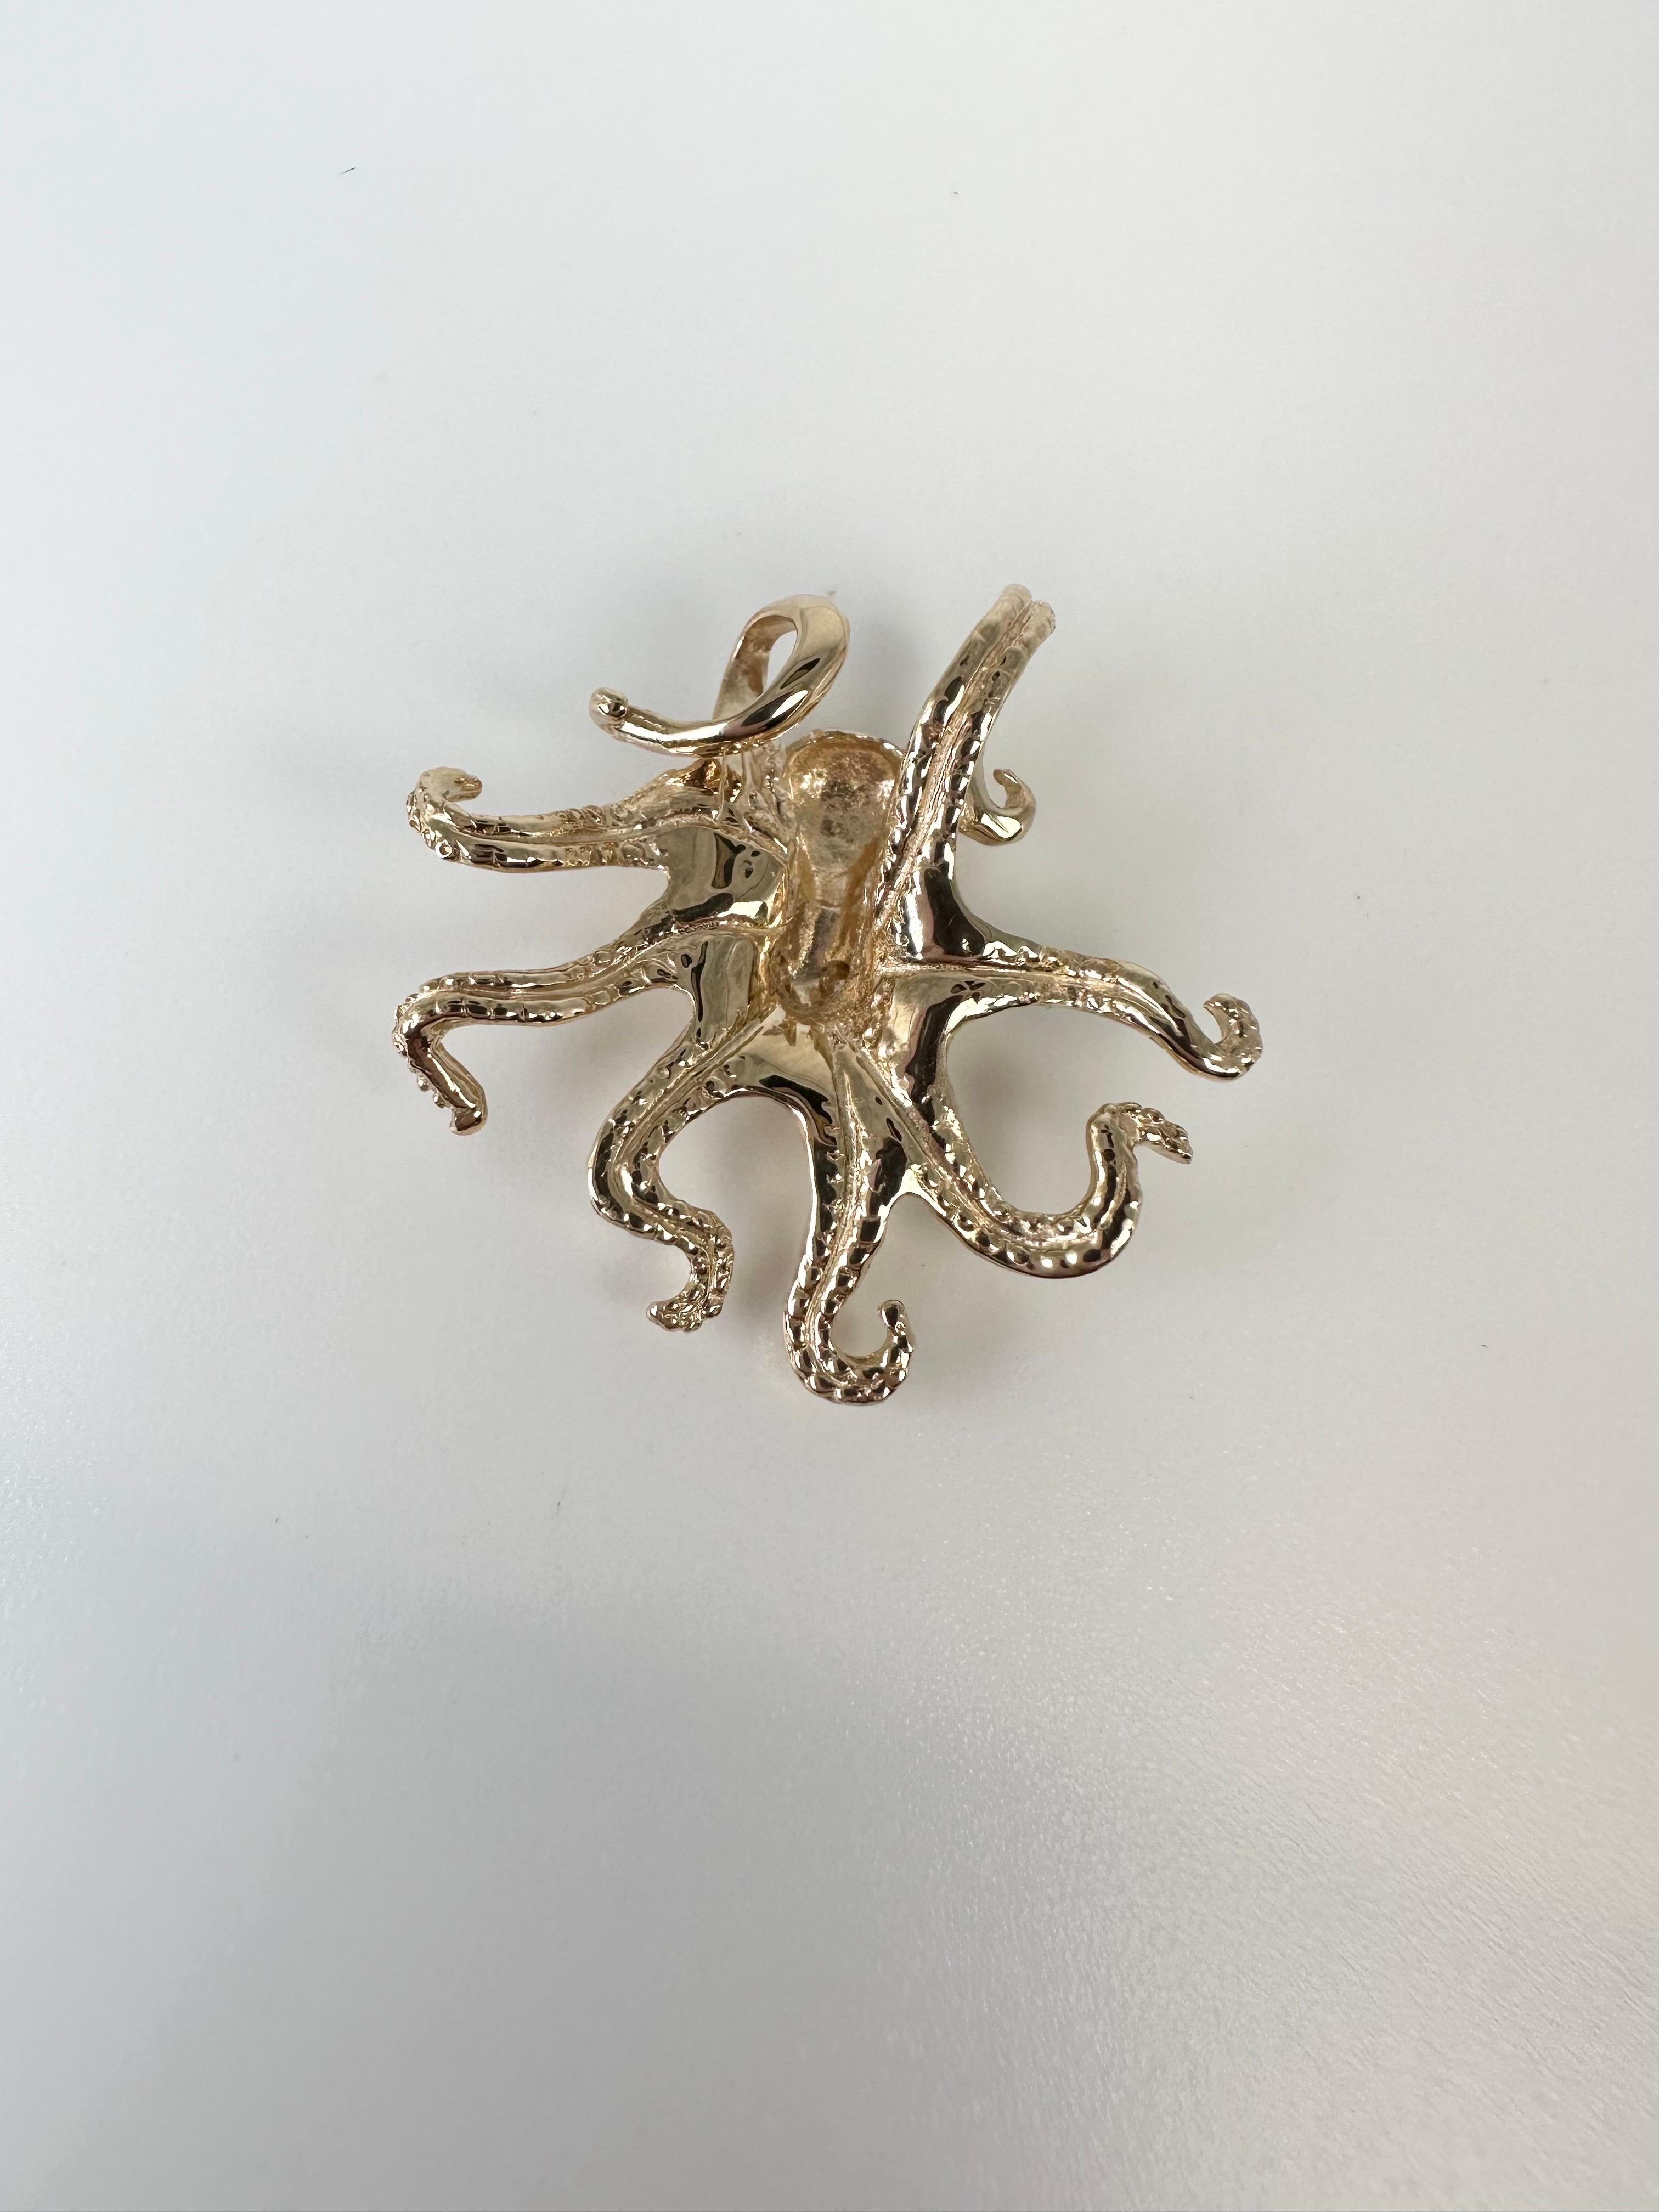 Love the sea? This is a beautiful representation of the sea from our little Jupiter in Florida! The octopus has many cute little details and two diamonds where the eyes are, nice large size, will come with a chain as well!

GOLD: 14KT gold
NATURAL